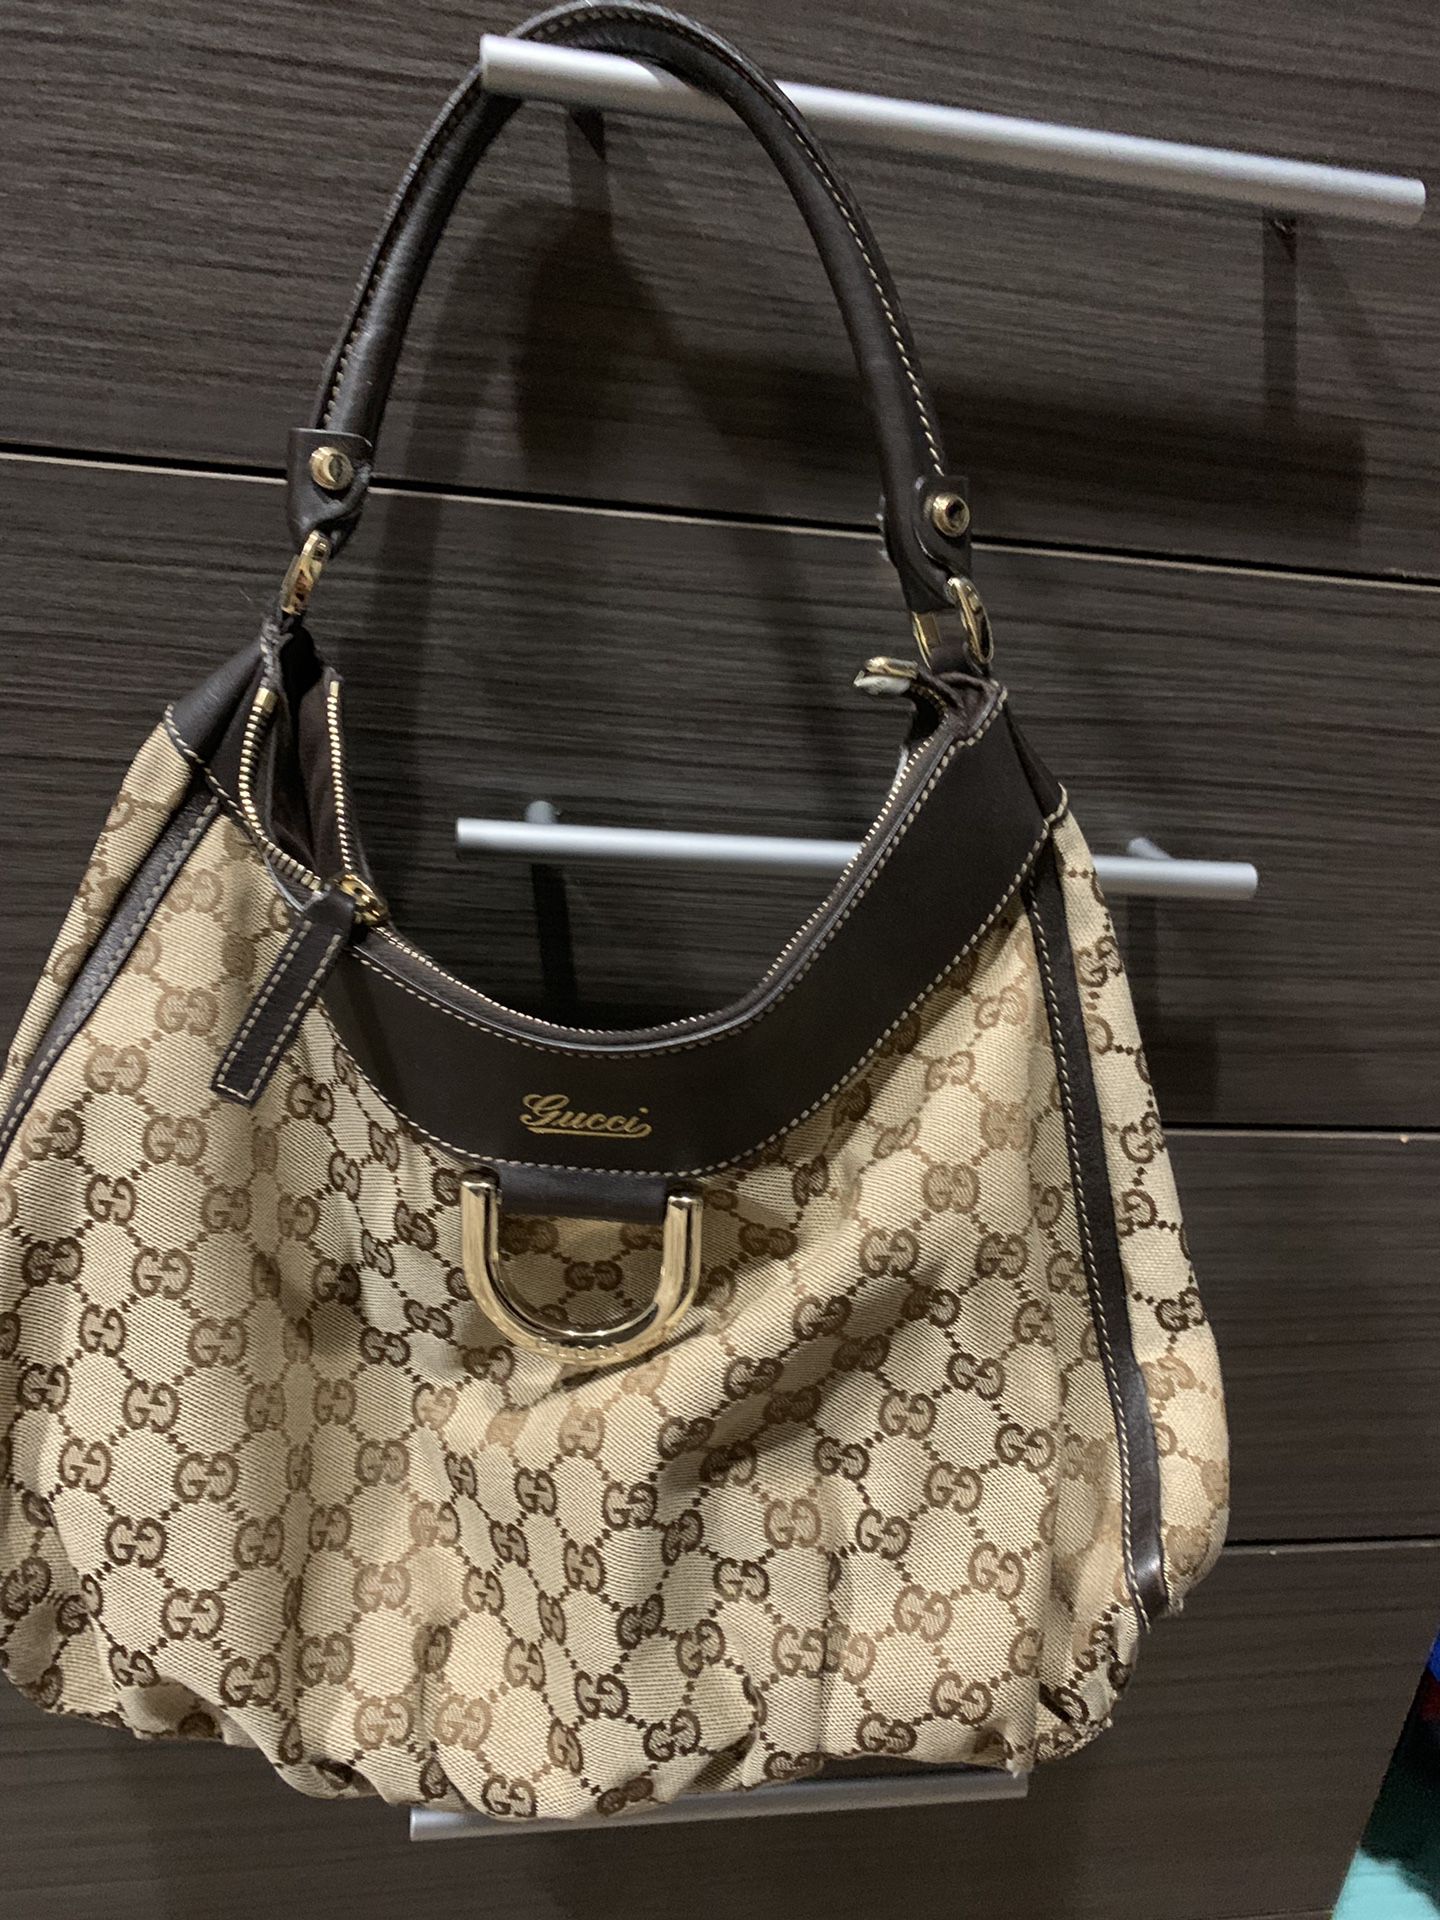 Authentic Gucci bag brown